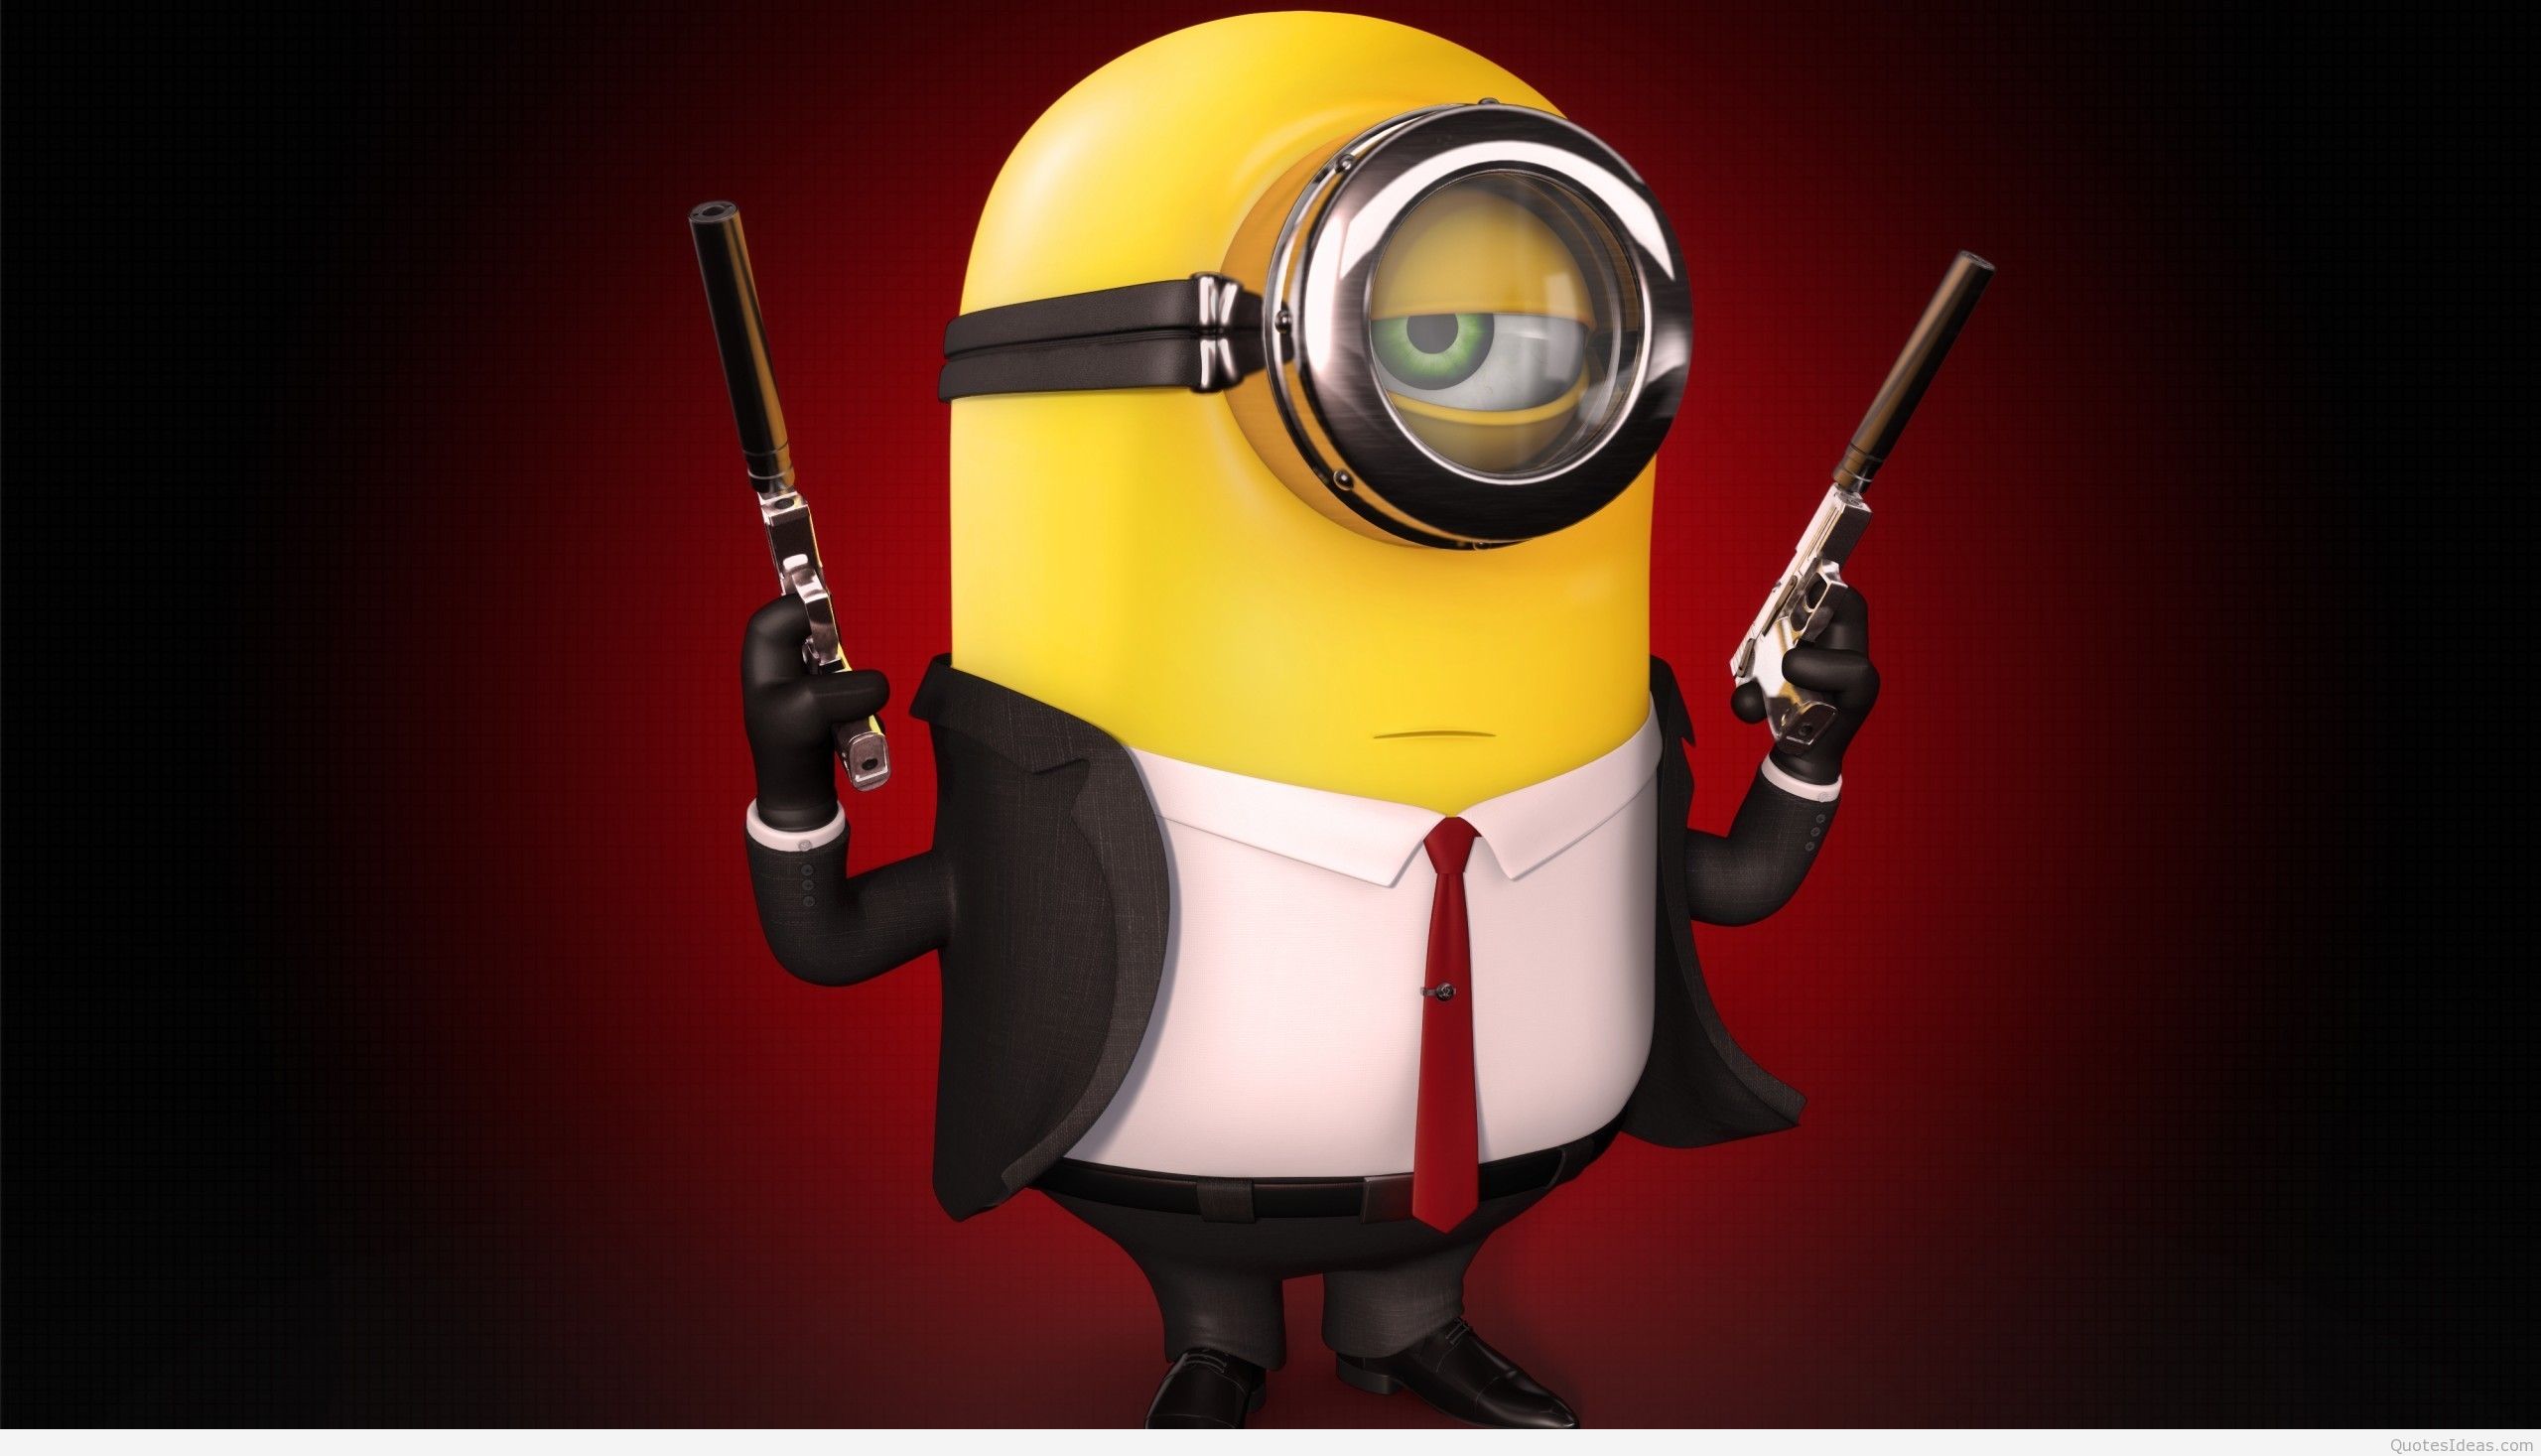 Top 50 minions wallpapers full background 2015 2016